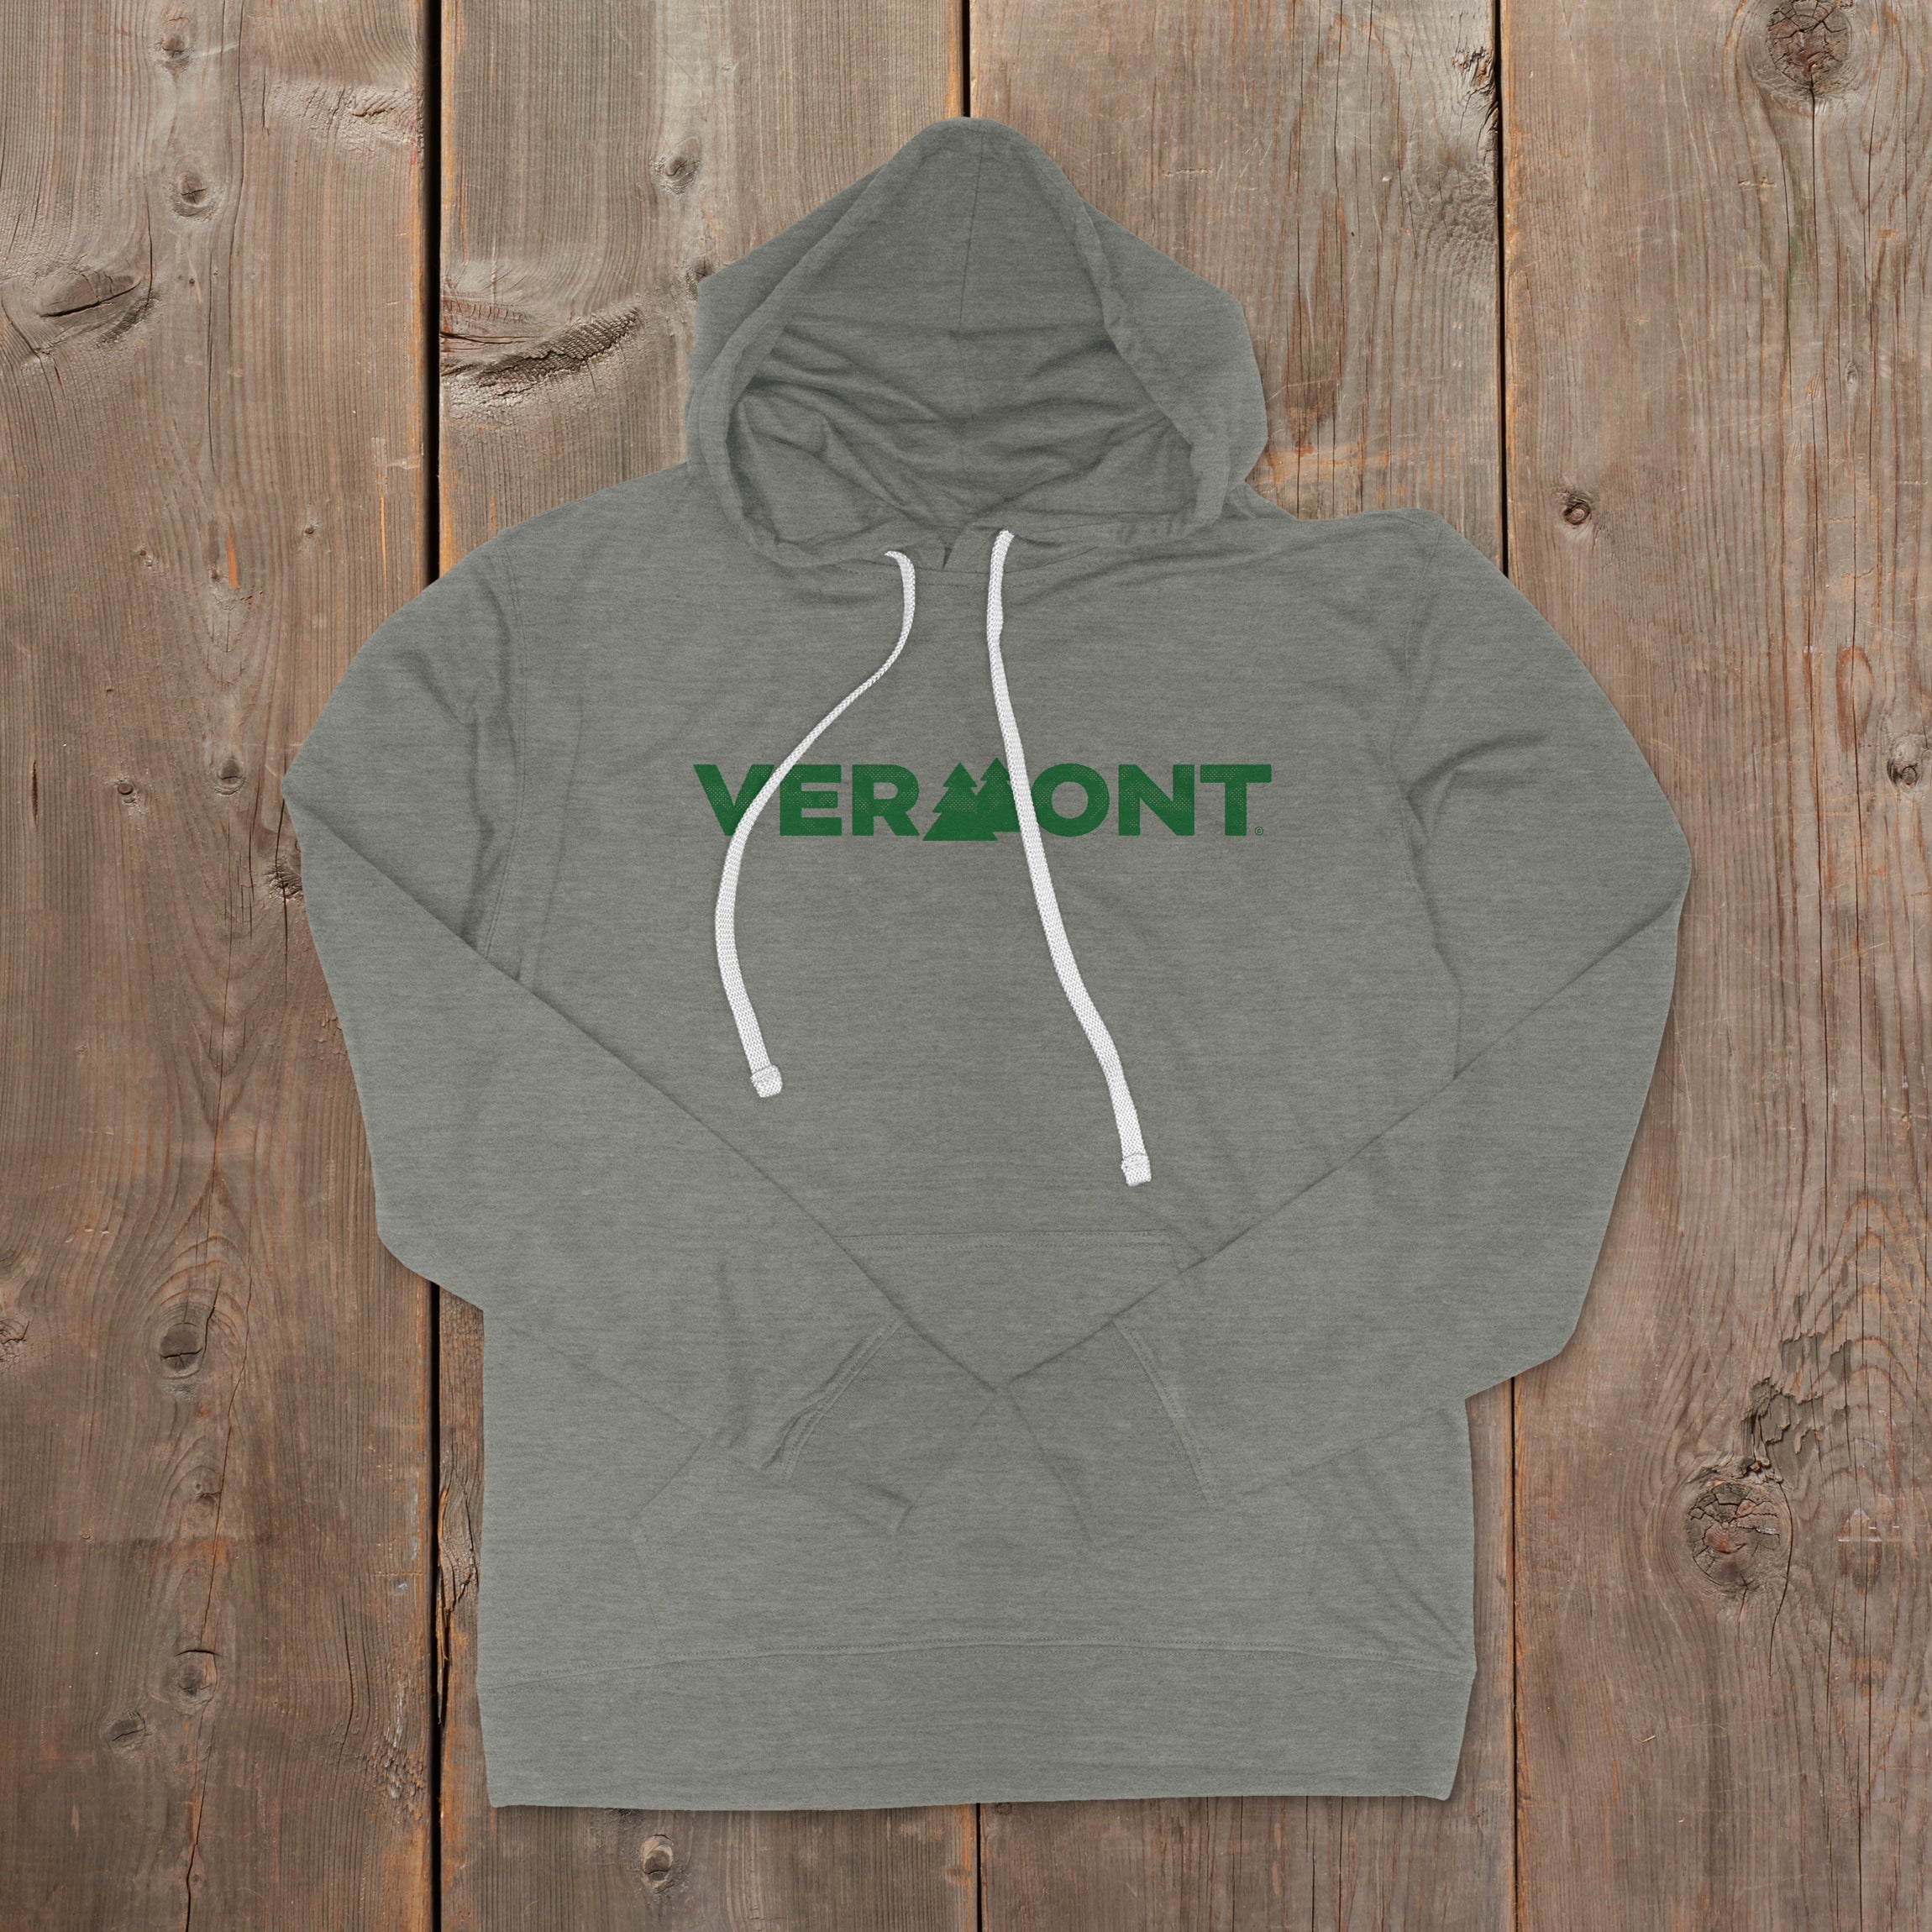 Pining for Vermont Hoodie